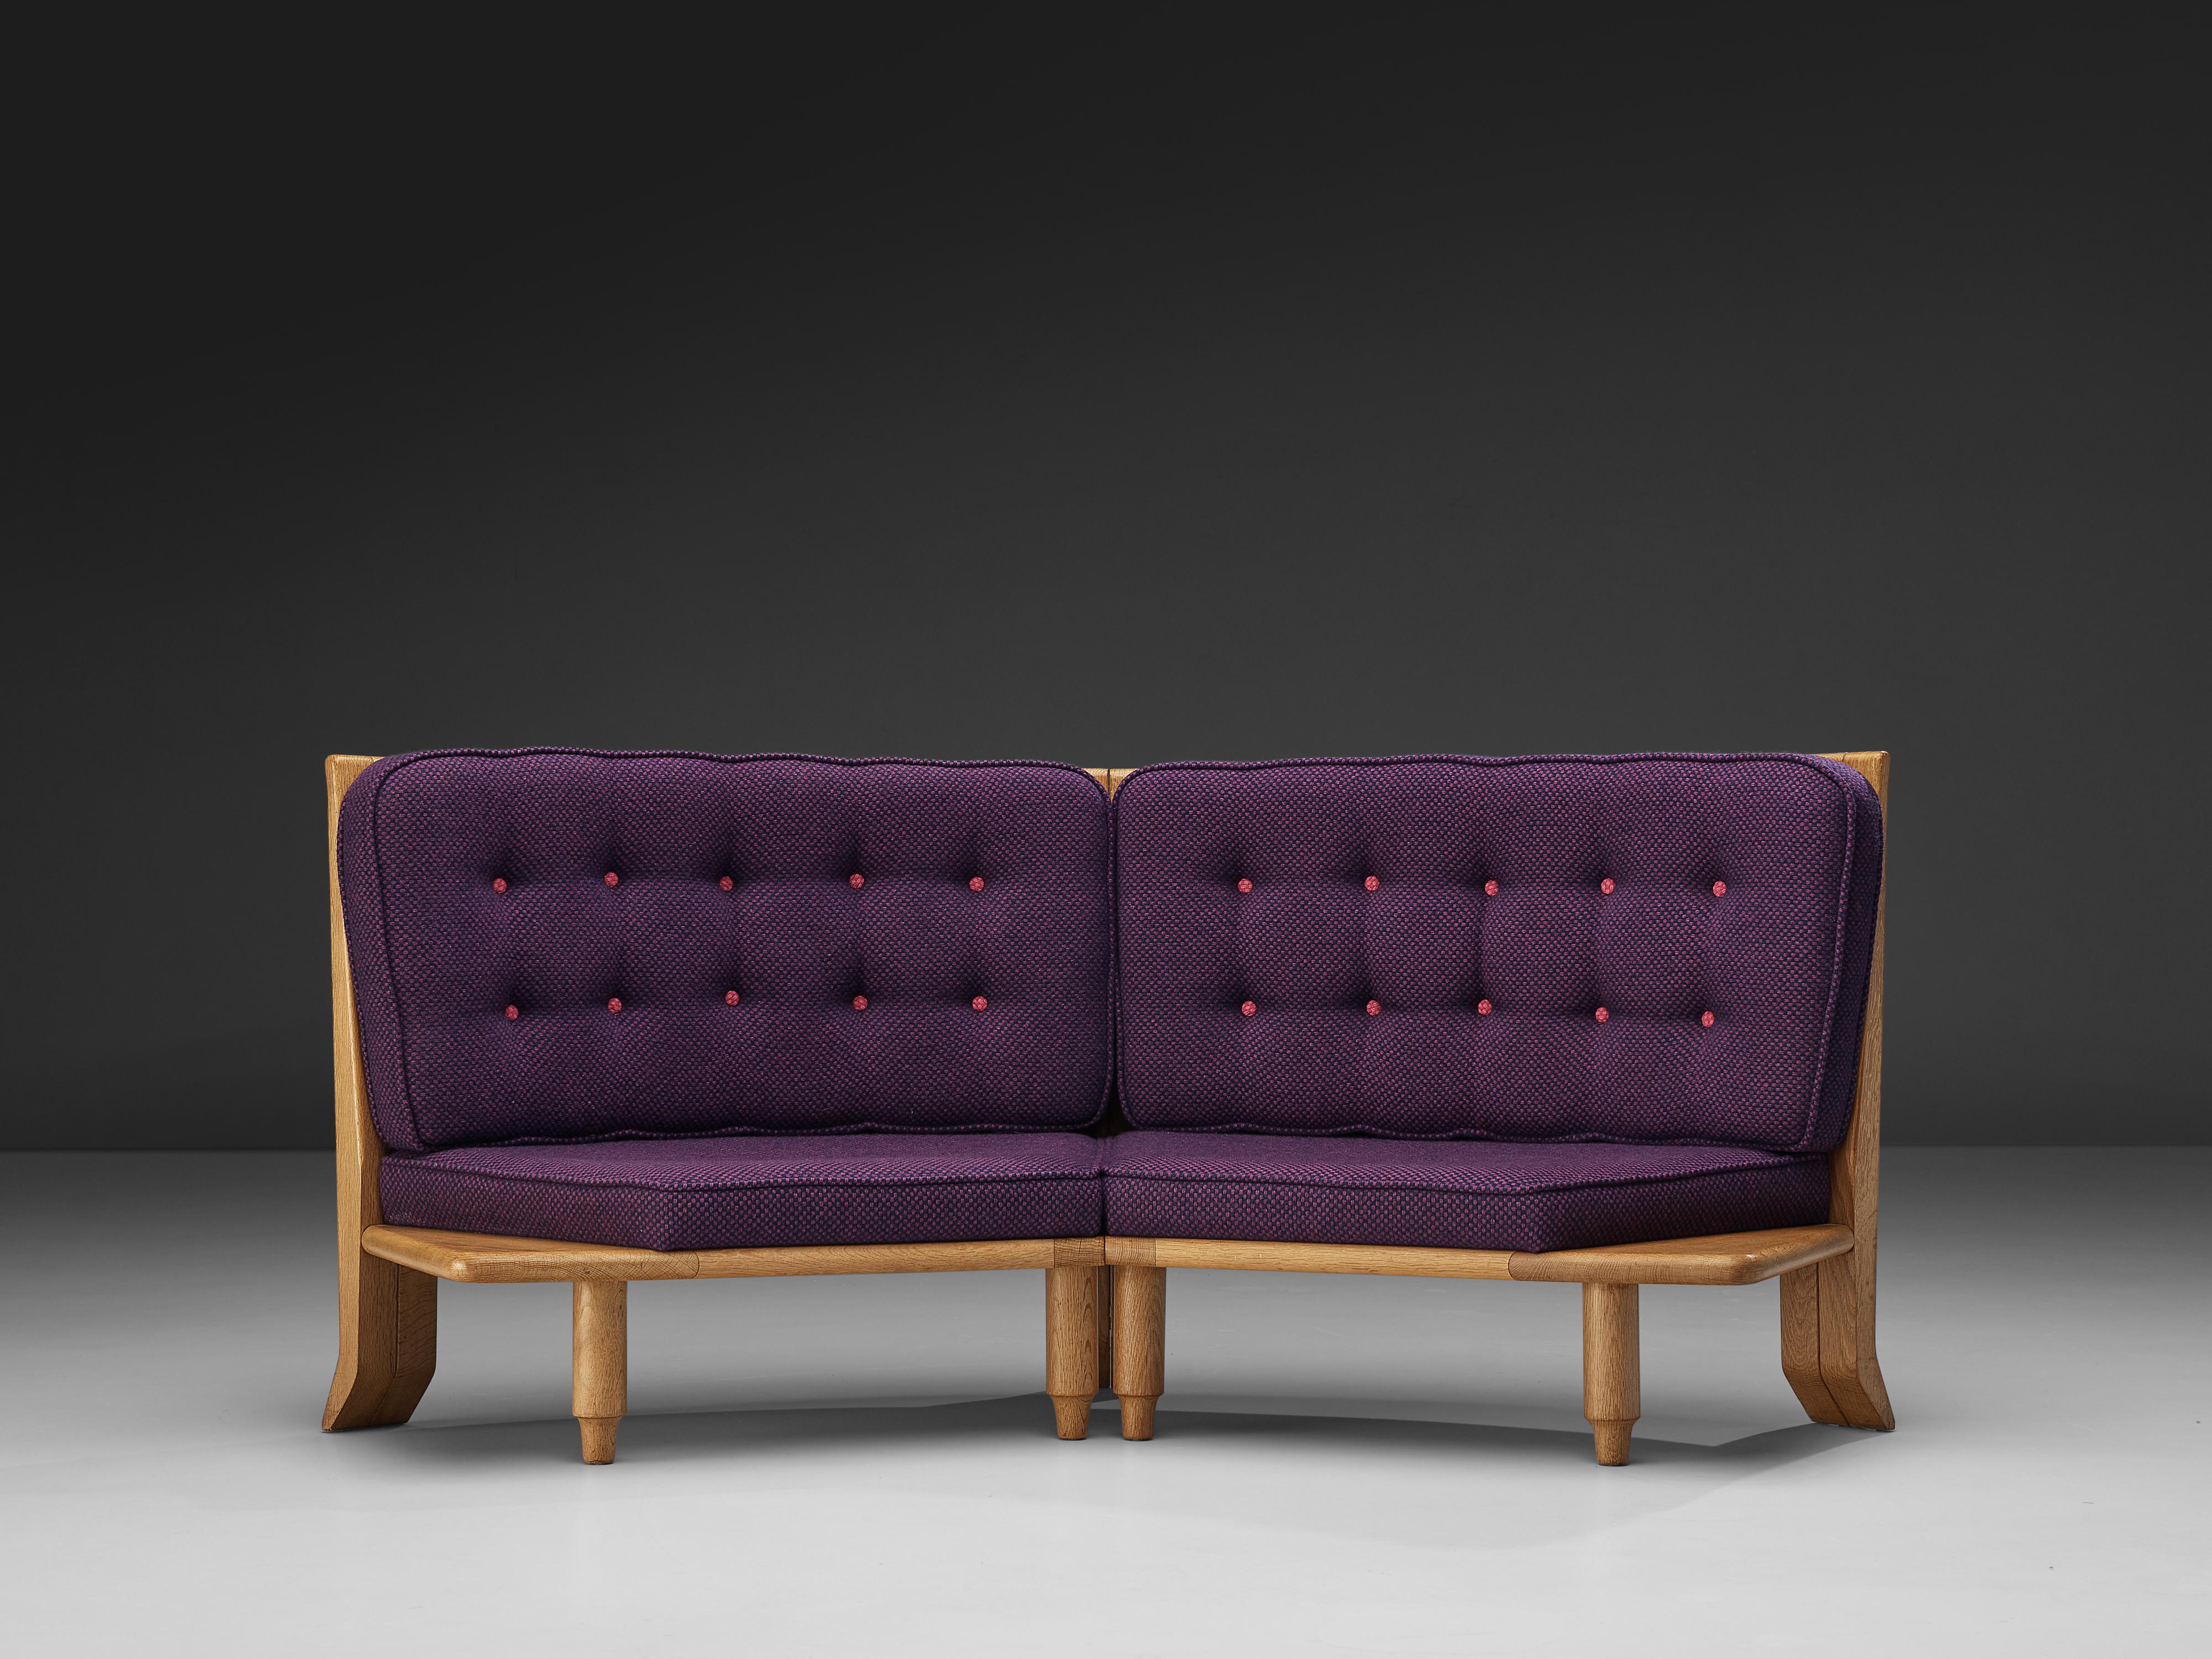 Guillerme & Chambron, sofa in purple fabric and oak, 1960s, France.

This distinctive sofa in beautifully patinated oak are by the French designer duo Guillerme et Chambron. This high back settee in solid oak shares the typical decorative details